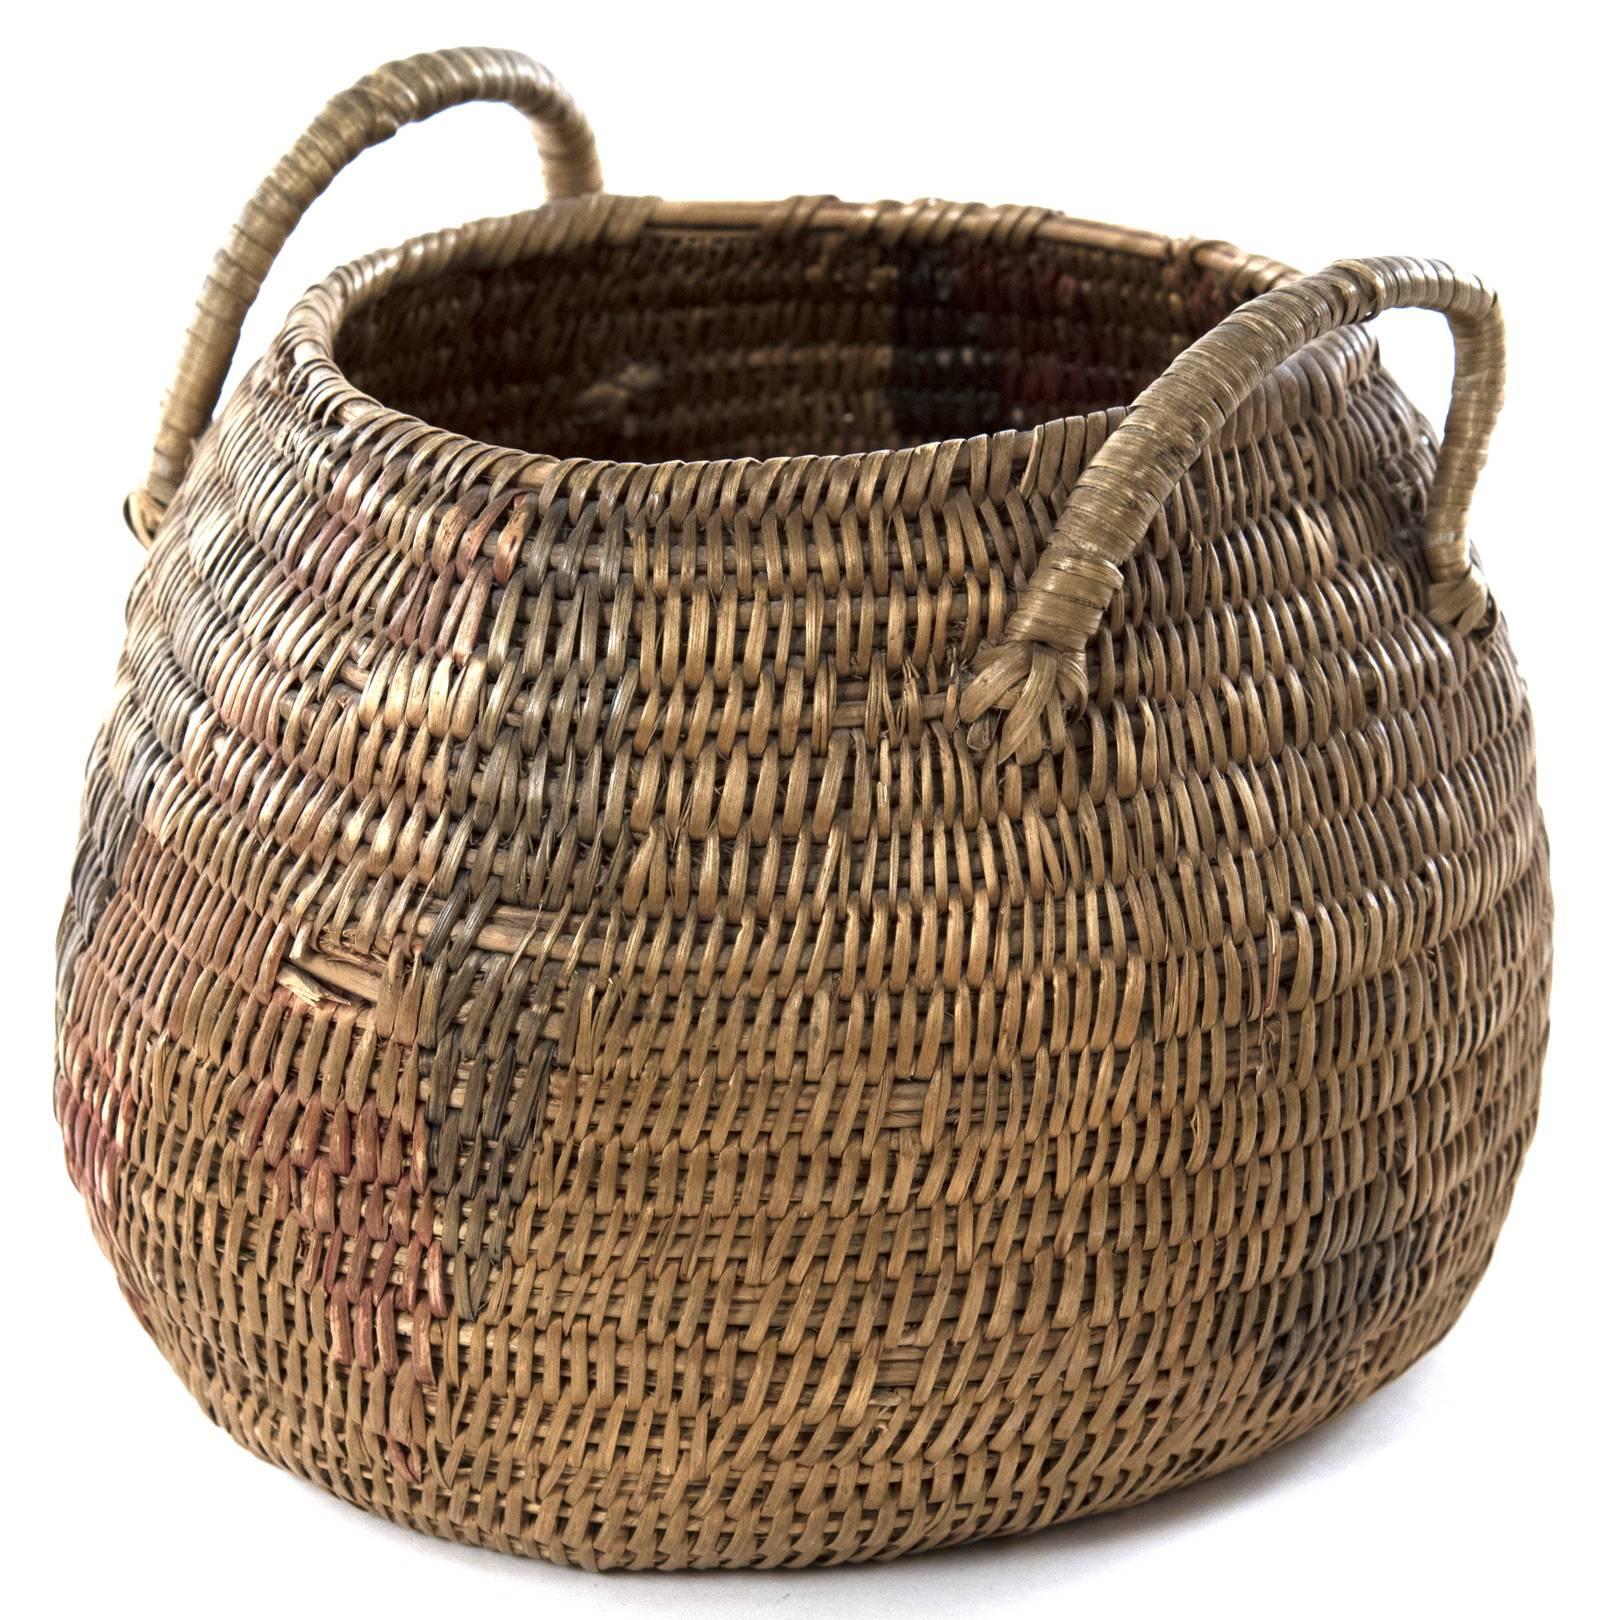 North American Twined Native American Handled Basket